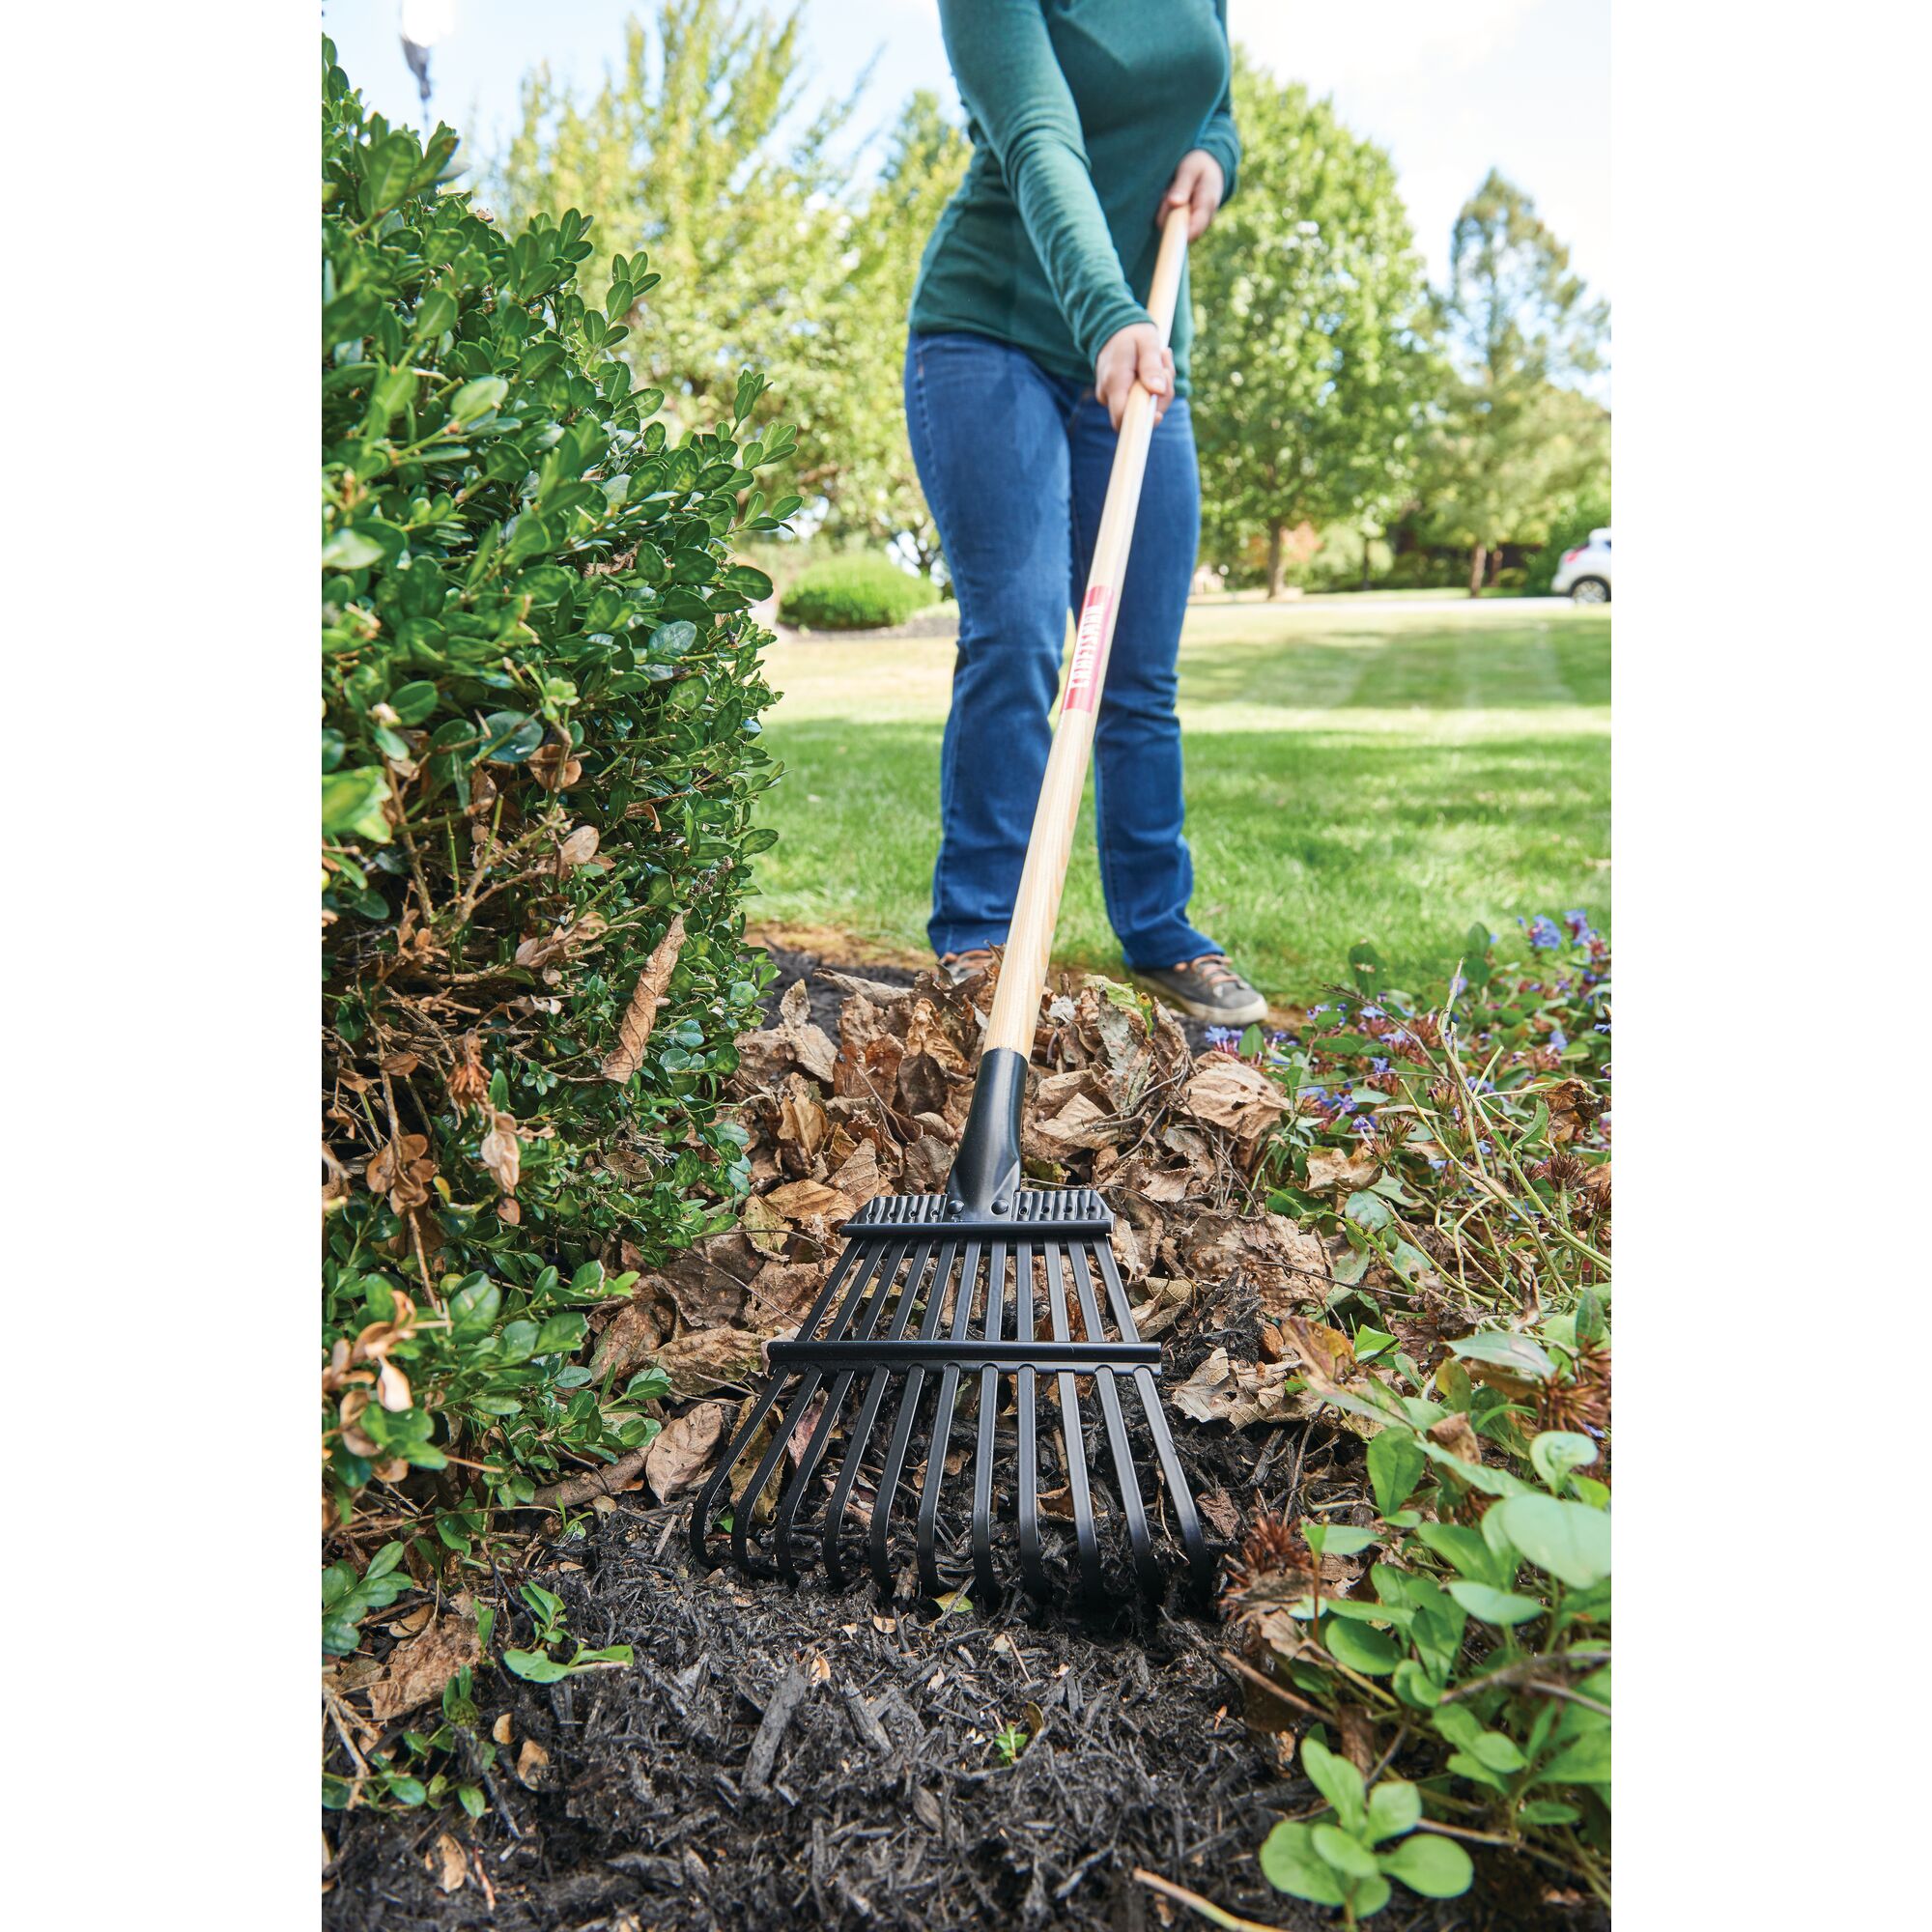 11 tine wood handle shrub rake being used to rake leaves from the ground by a person.